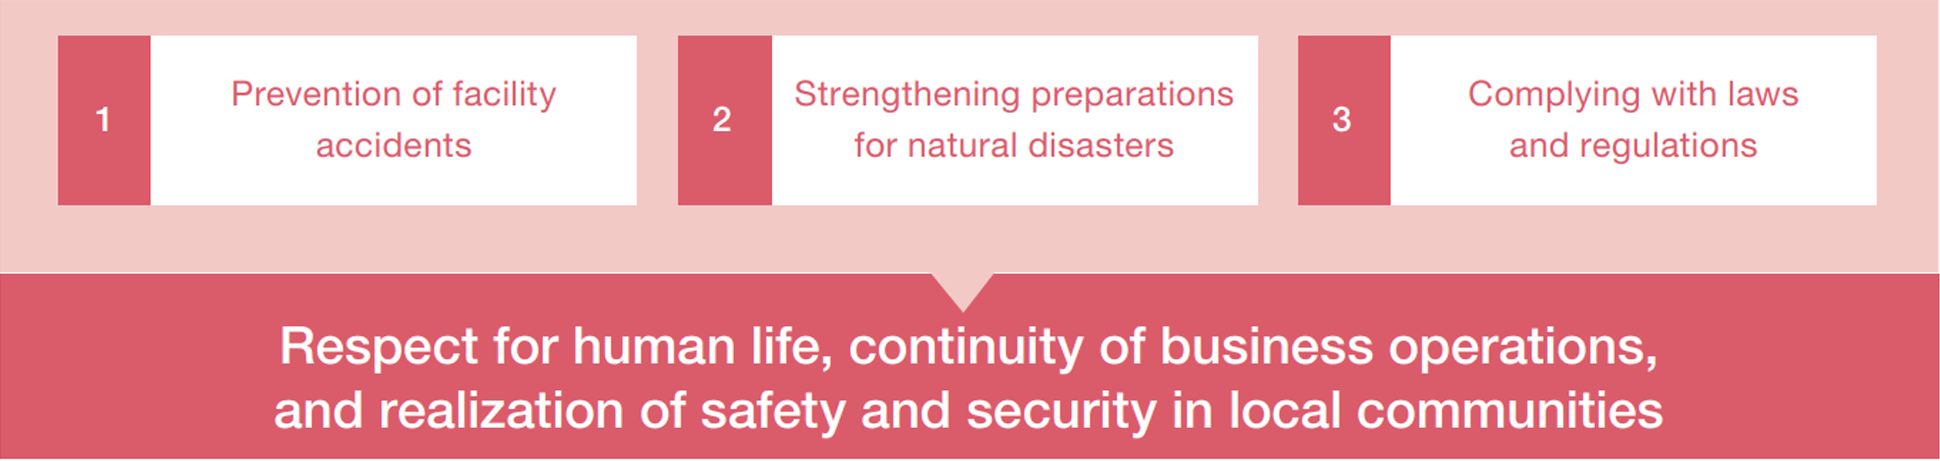 Companywide Disaster Preparation Management Policy